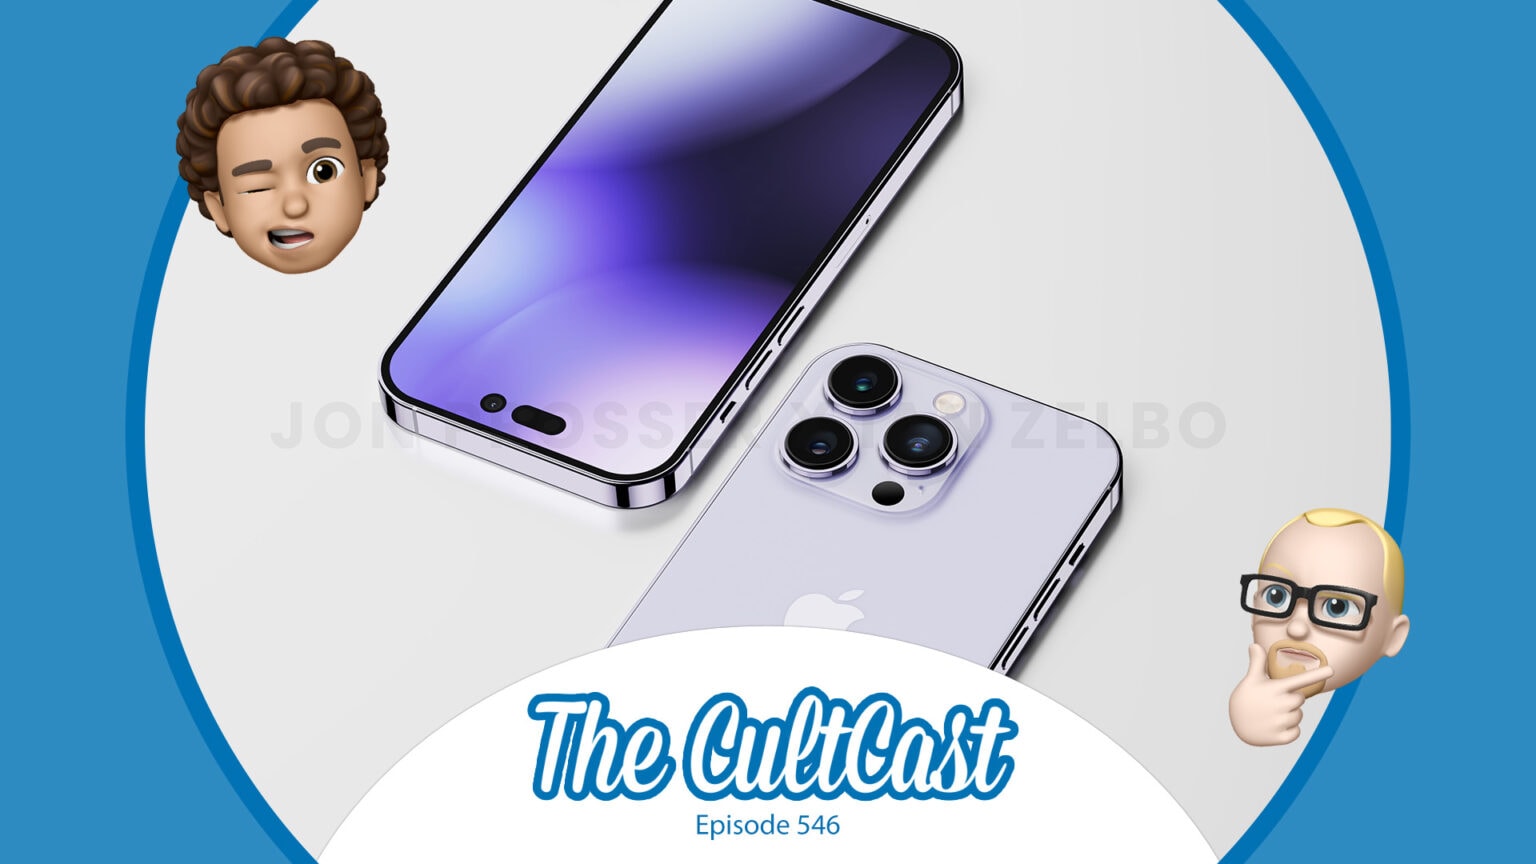 The CultCast Apple podcast: We're scrutinizing these new purple iPhone 14 Pro renders.